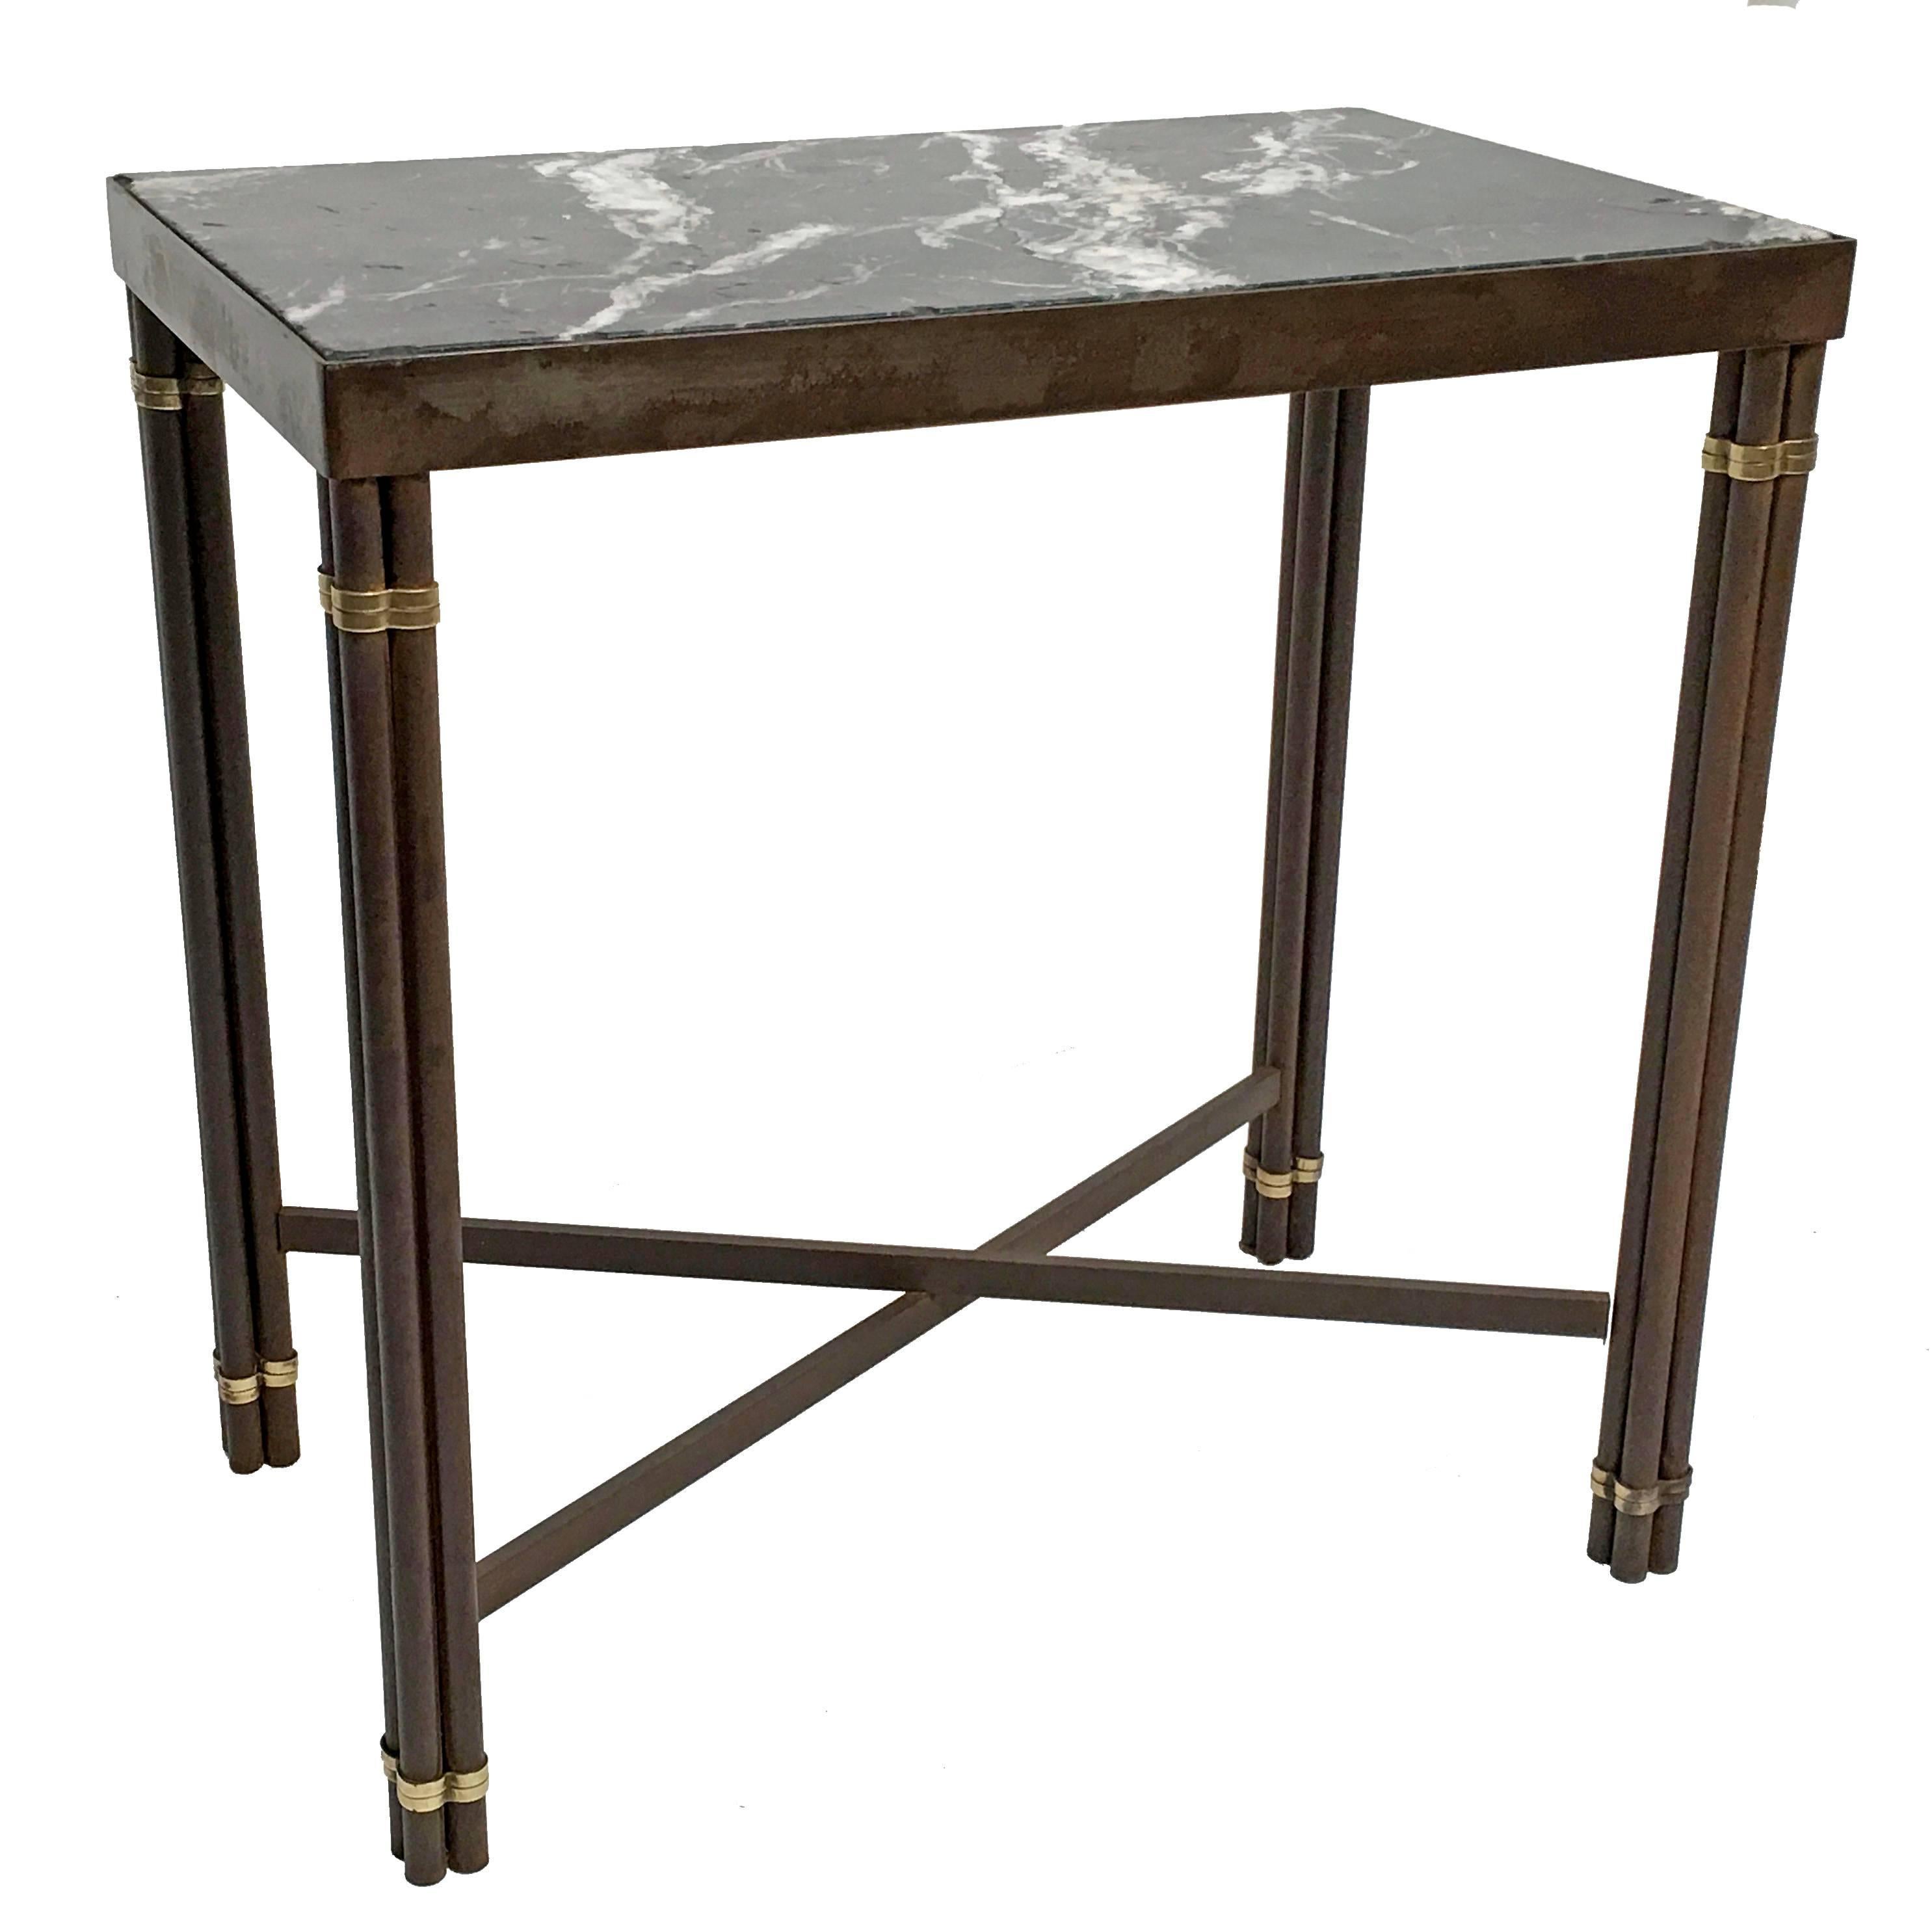 Rectangular iron and brass side table with inset Spanish Nero Marquina black marble top. The four iron rods tied with a brass band at the top and base with an X stretcher. Iron has been cleaned and polished. The marble-top has several minor chips